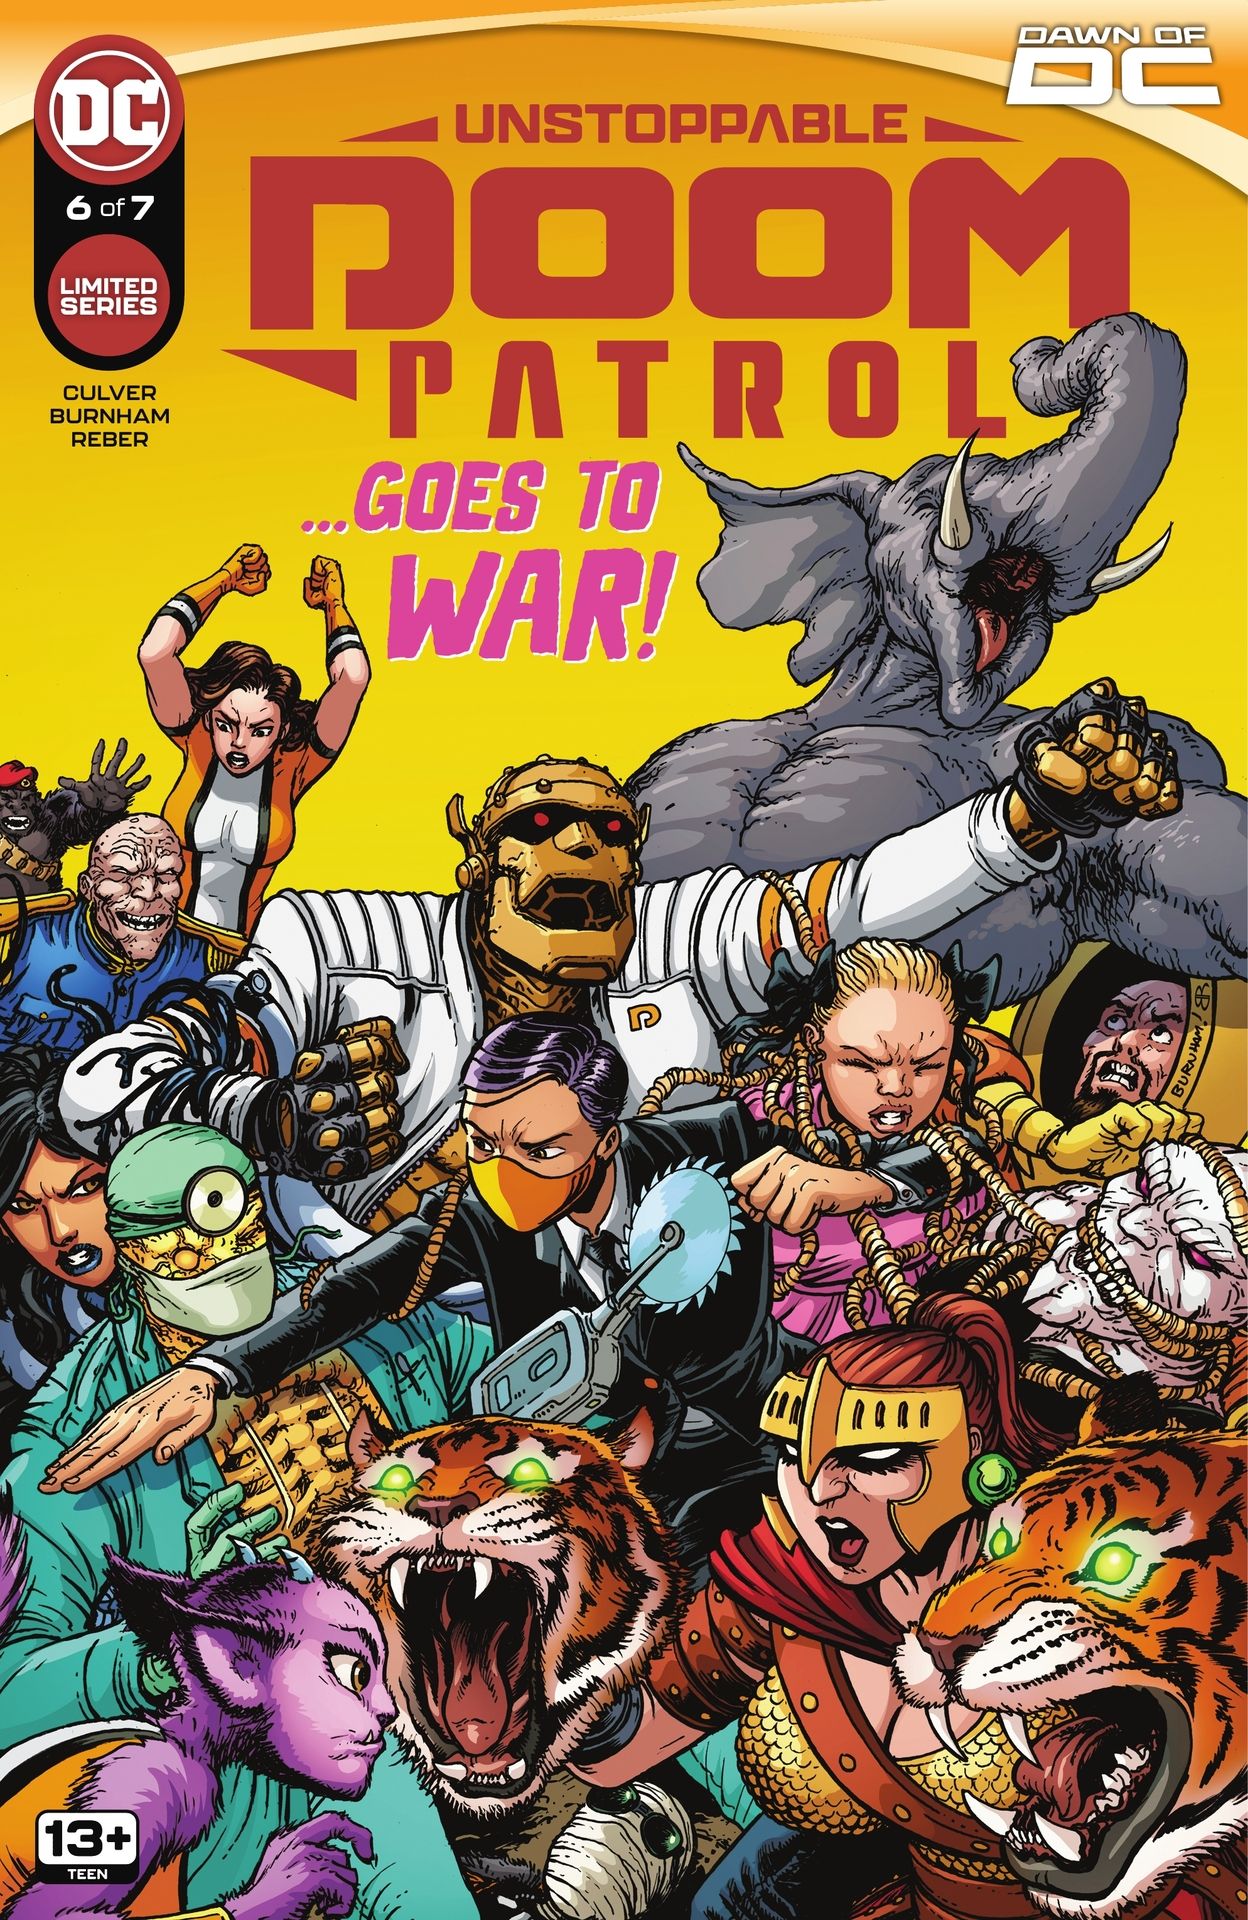 Read online Unstoppable Doom Patrol comic -  Issue #6 - 1